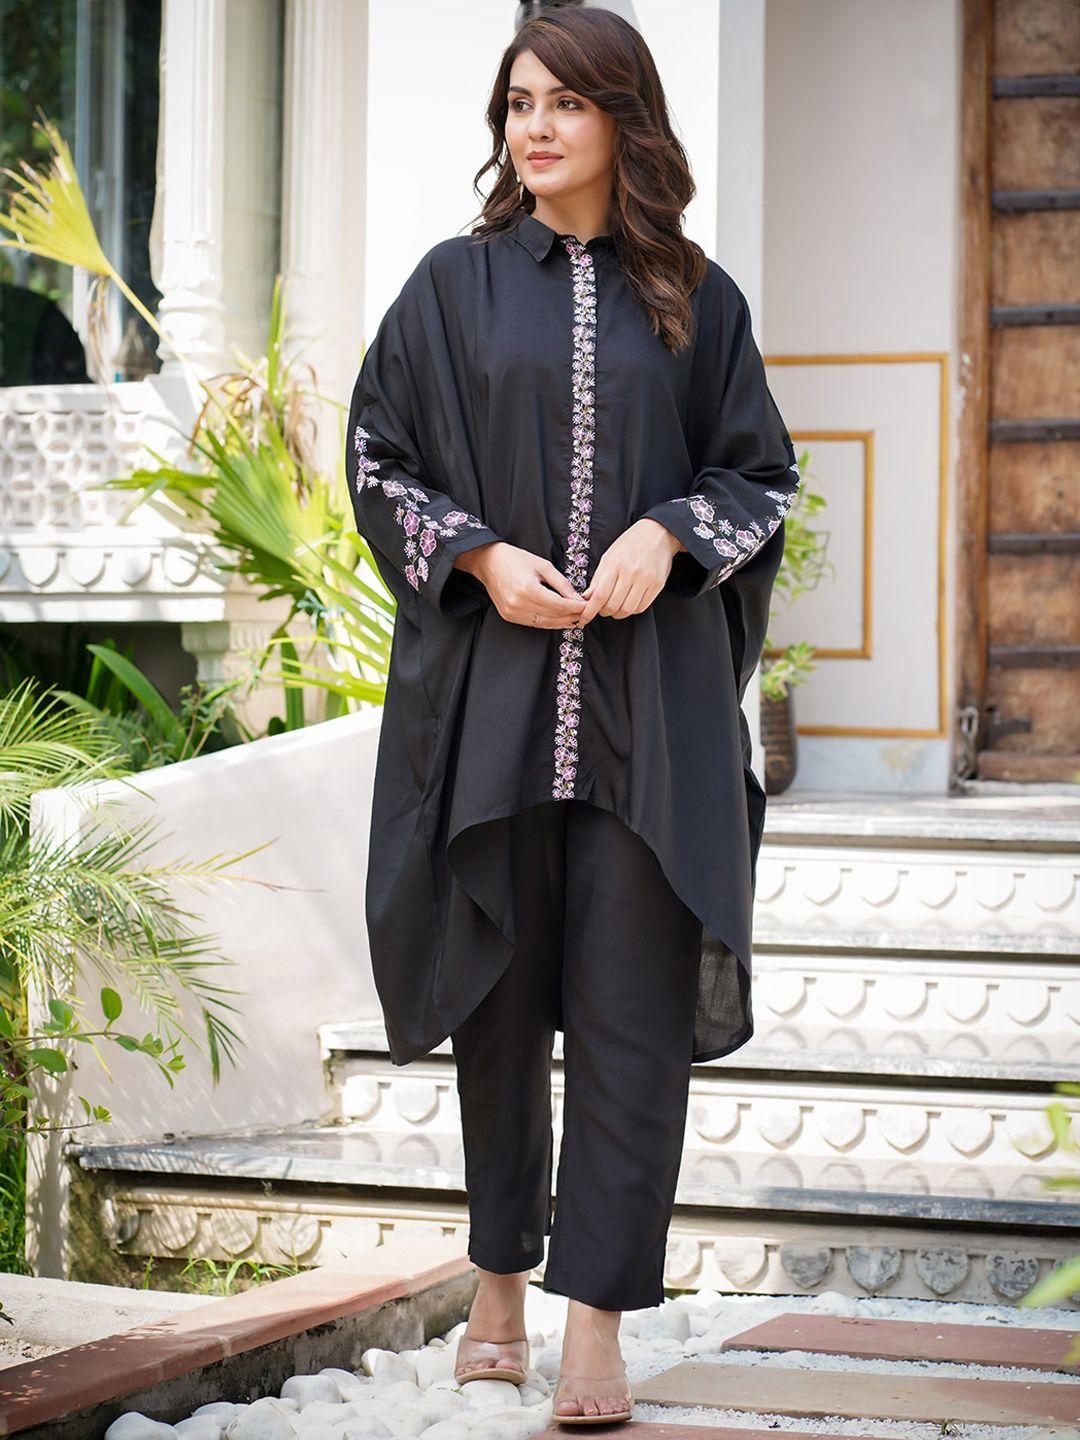 yufta floral embroidered high-low oversized tunic with trousers